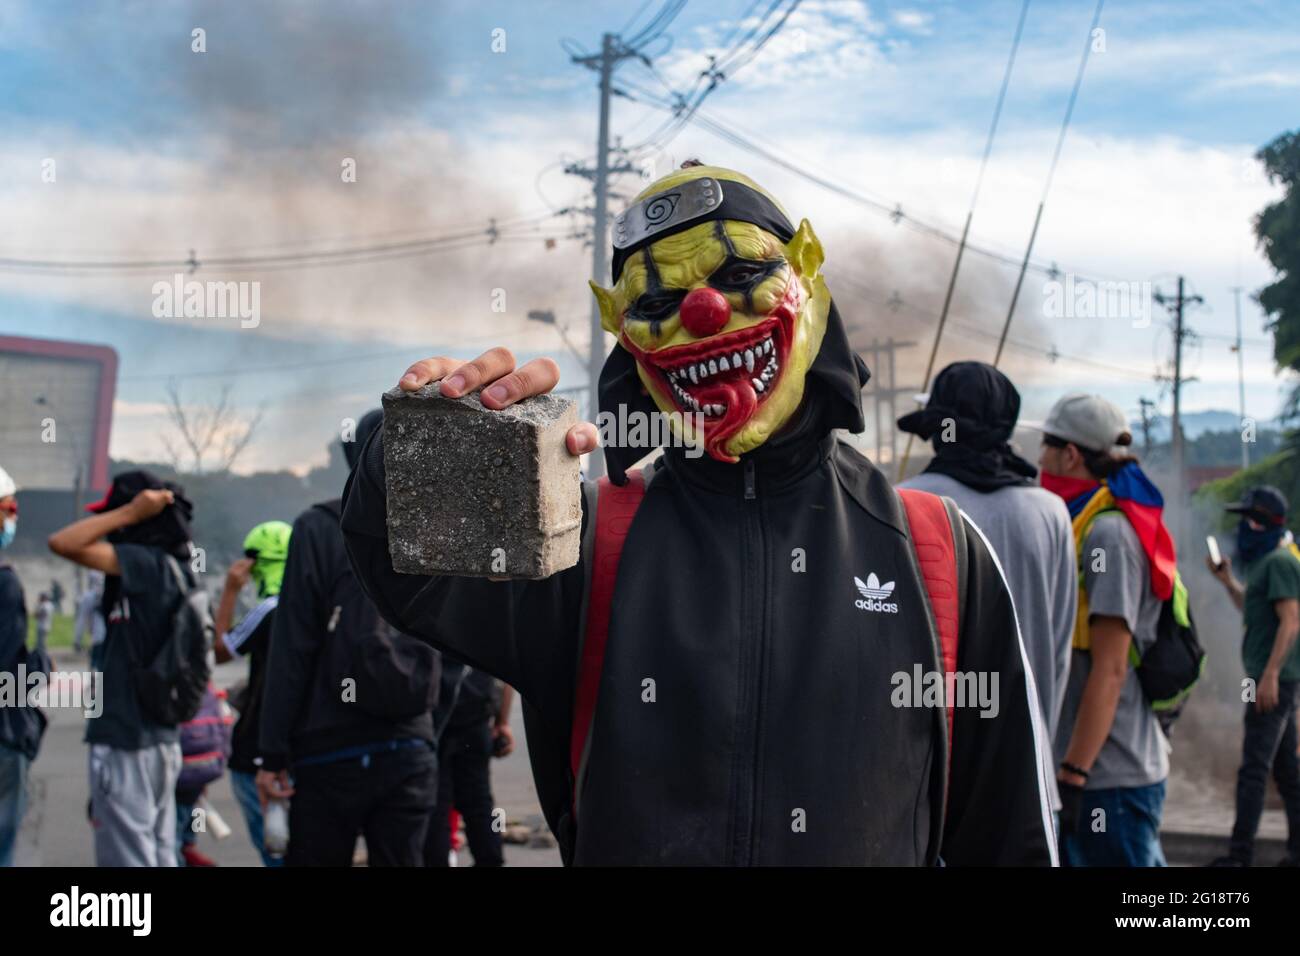 A member of the front line using a mask poses for a portrait holding a rock as clashes between demonstrators and Colombia's riot police (ESMAD) erupt in Medellín, Colombia after several weeks of anti-government protest against President Ivan Duque's tax and health reforms and unrest and abuse of authority cases that leave at least 70 dead according to NGOs on June 4, 2021. Stock Photo